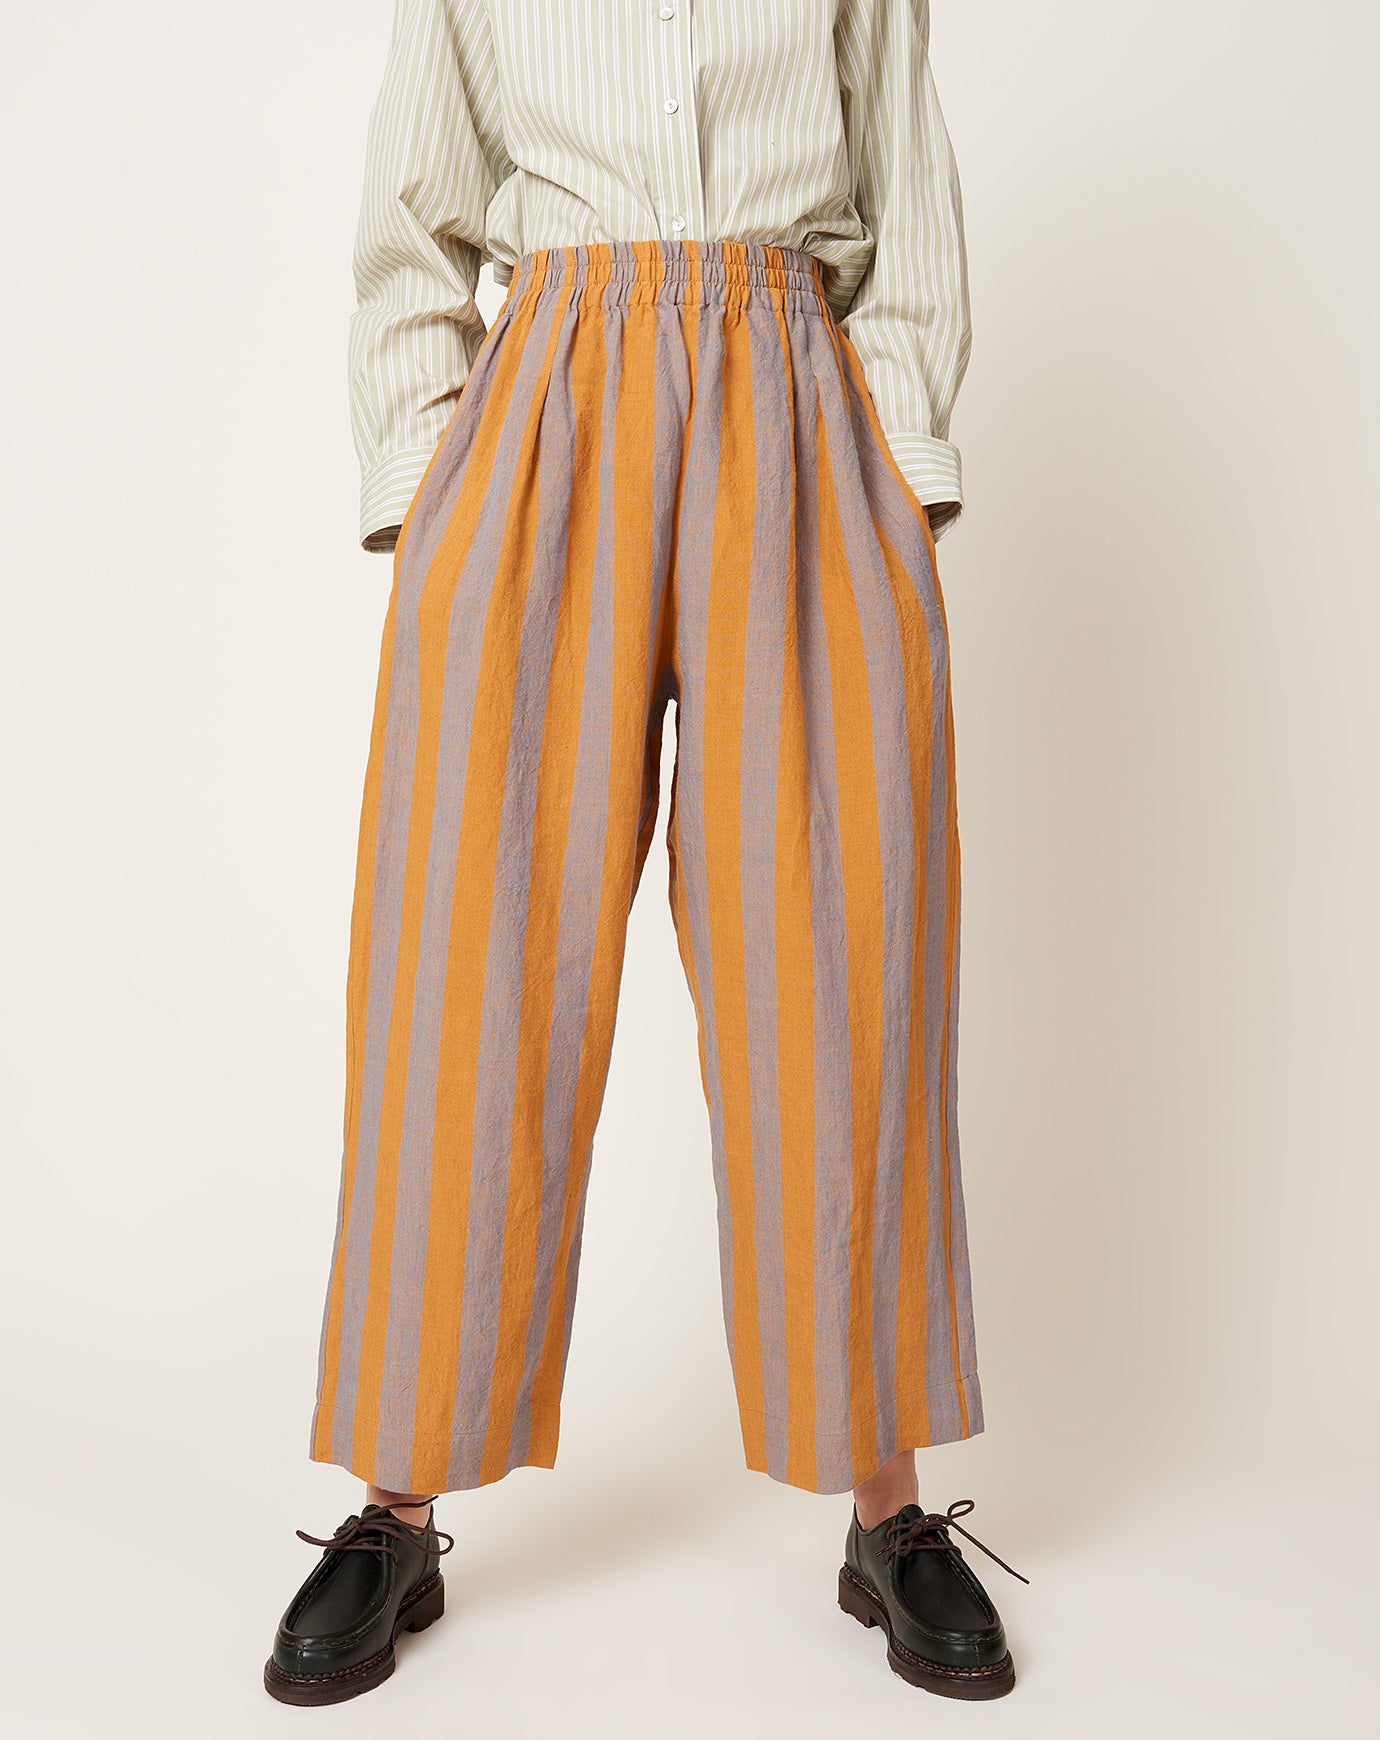 Cawley Luna Trousers in Bronze & Jeans